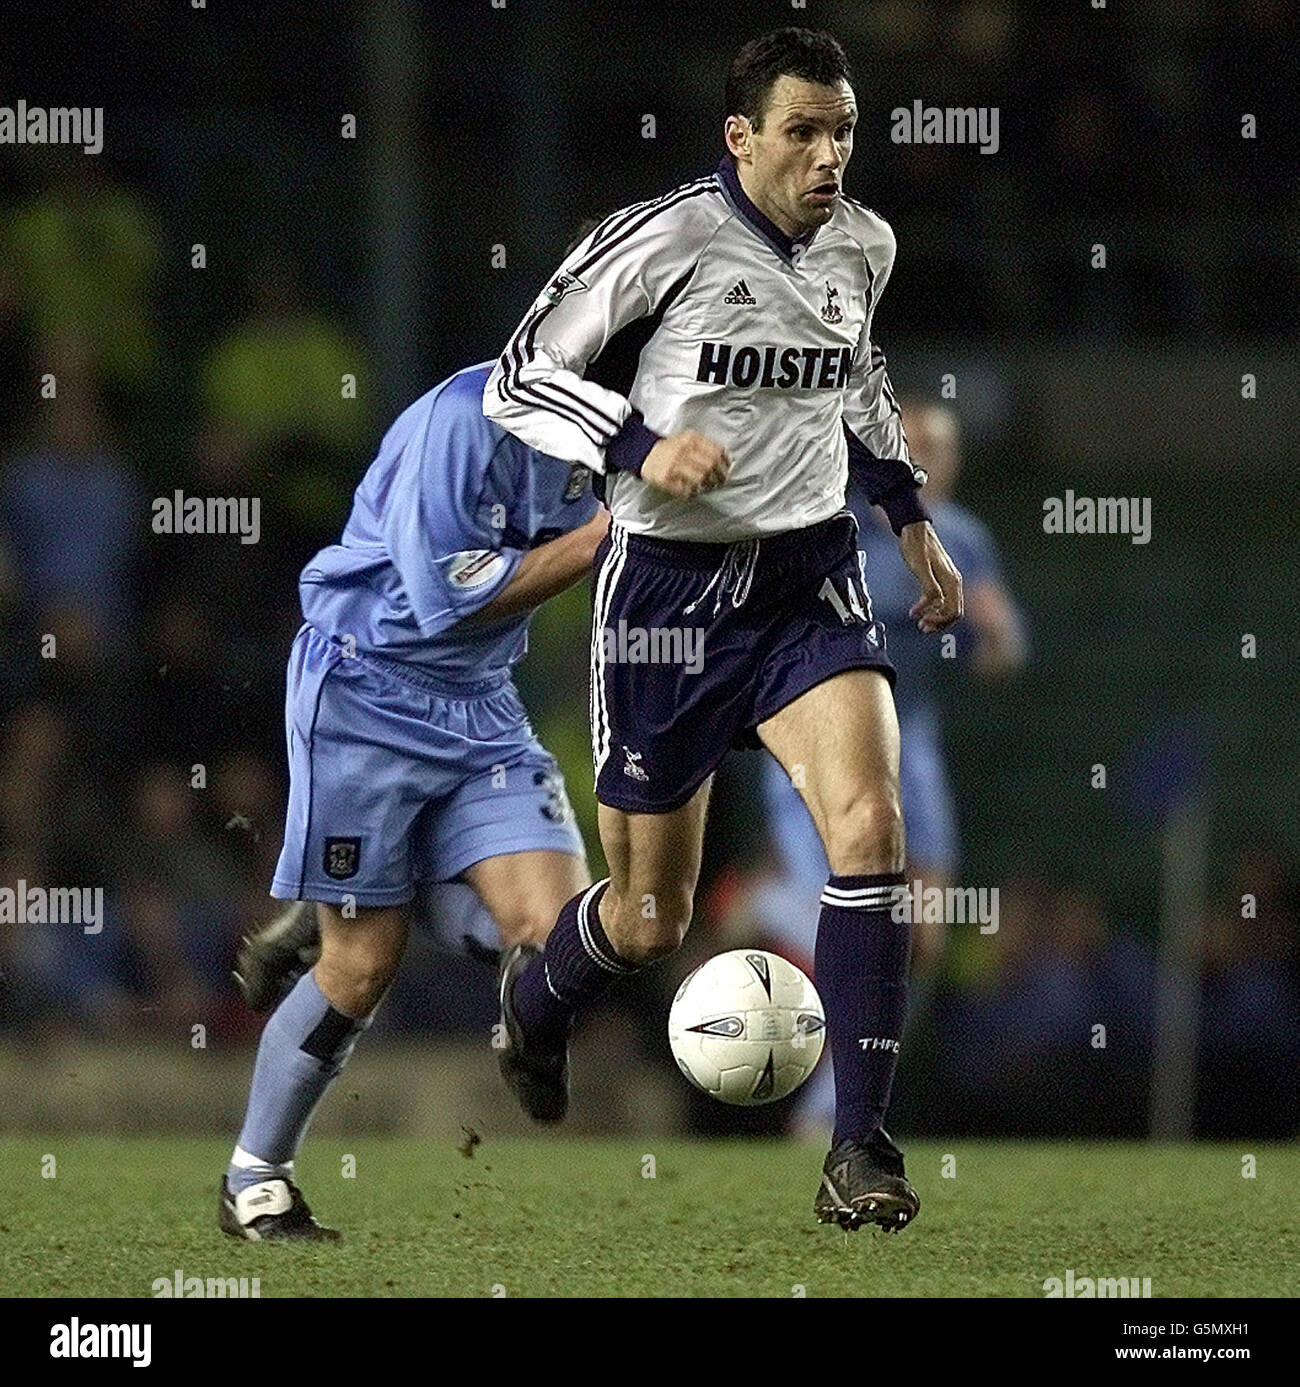 Tottenham Hotspur Gus Poyet in action in the Axa F.A. Cup 3rd Round game between Coventry City V Tottenham Hotspur, at Highfield Road Stadium, Coventry.. Photo David Davies.. Stock Photo